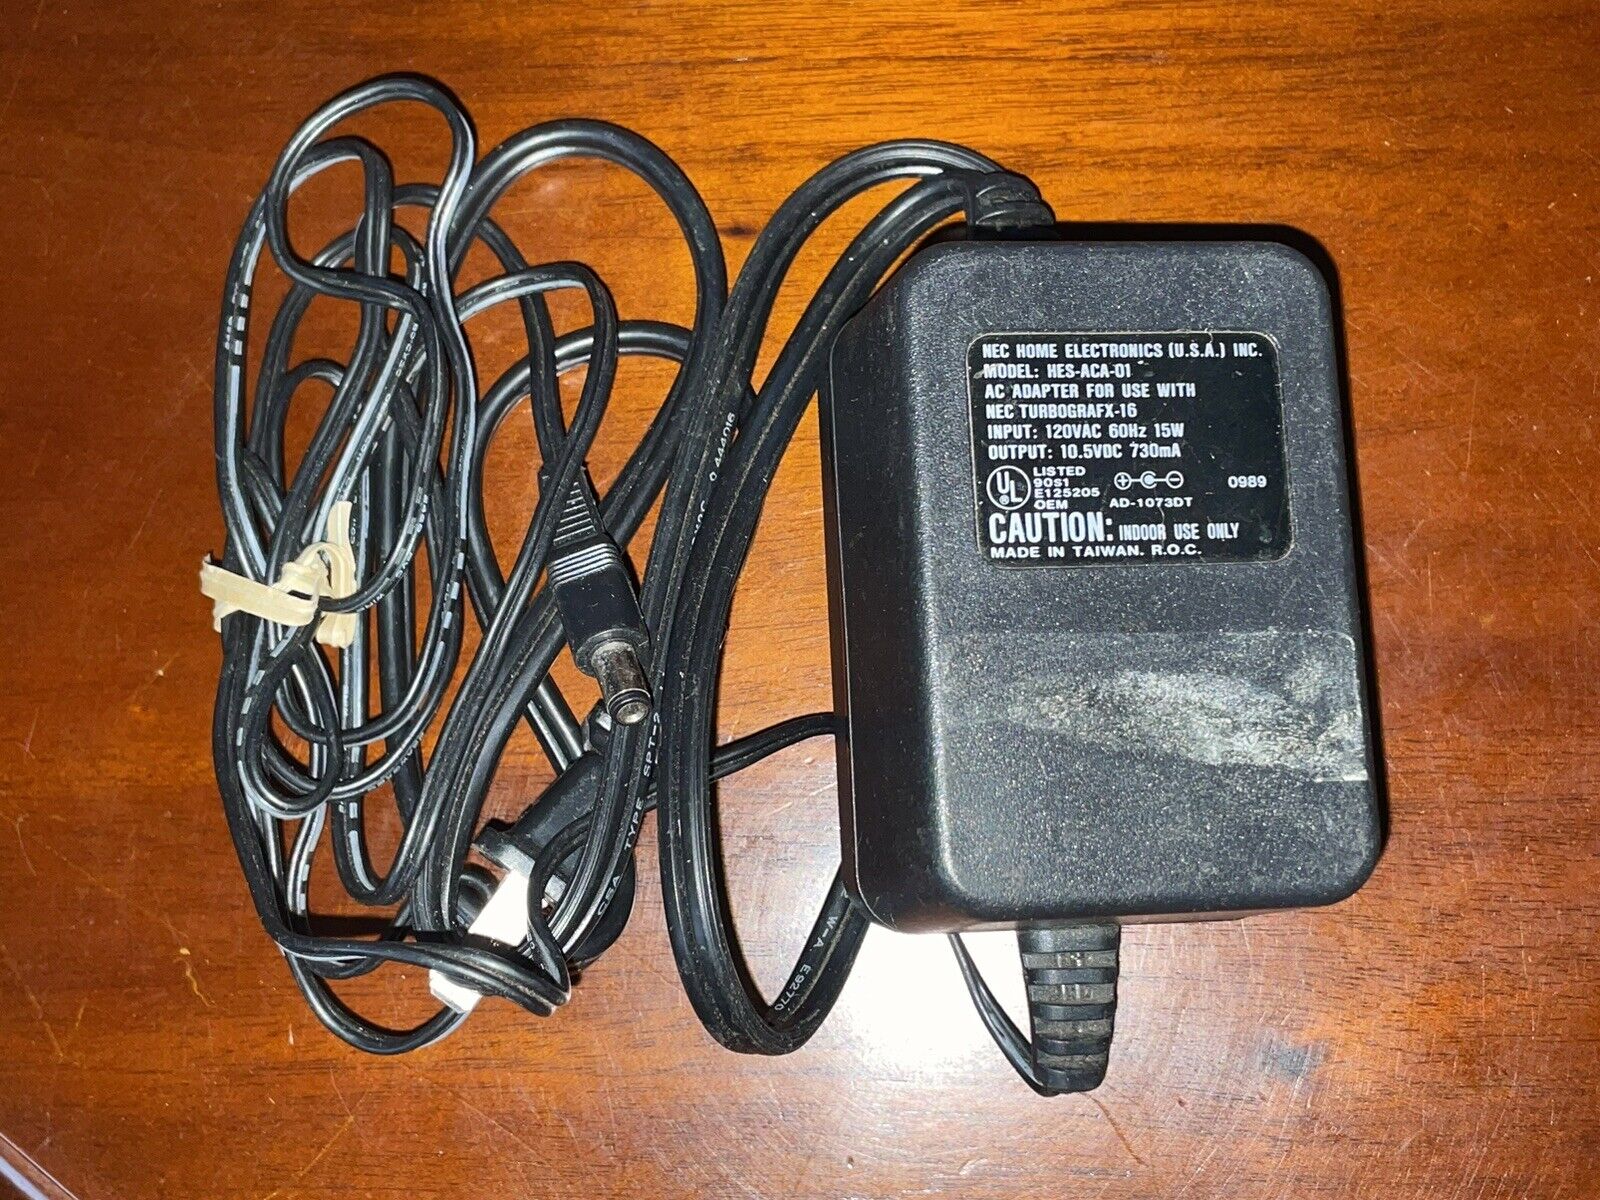 *Brand NEW* NEC 10.5V 730MA AC ADAPTER Turbo Grafx 16 AC Adapter OEM Official Cable Cord HES-ACA-01 Tested Pow